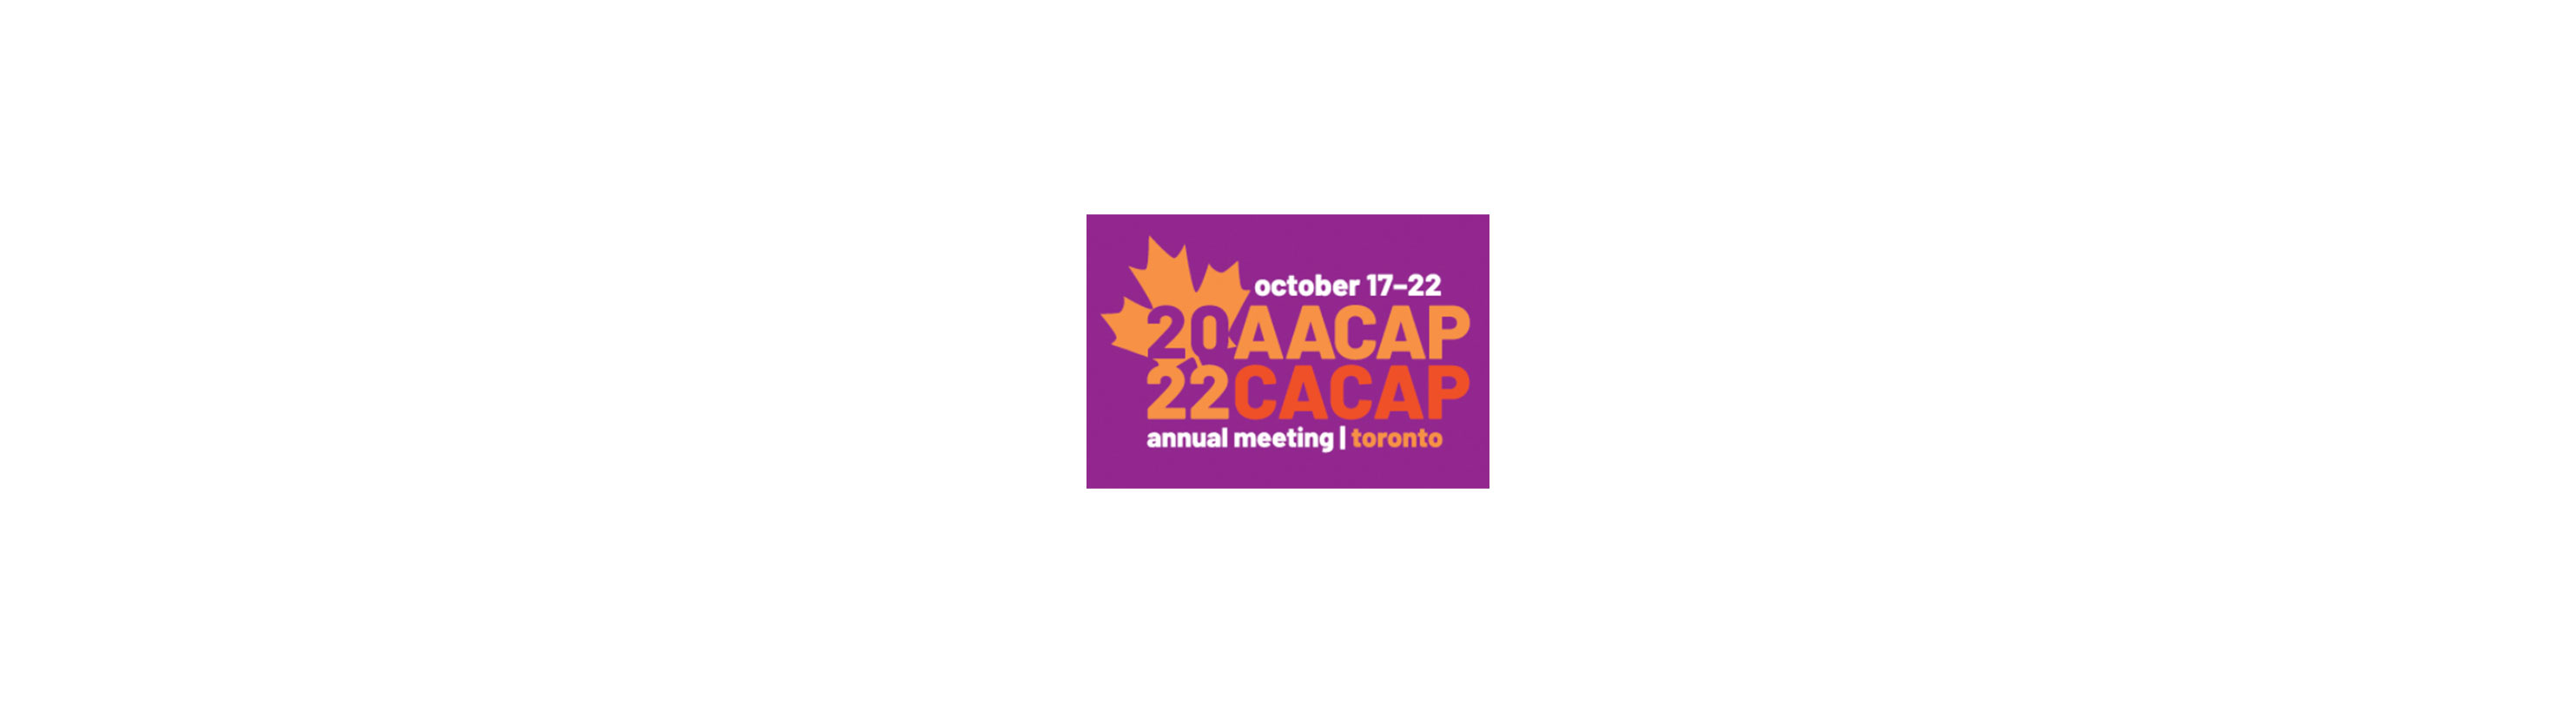 BHN Leaders Highlighted at AACAP in Toronto